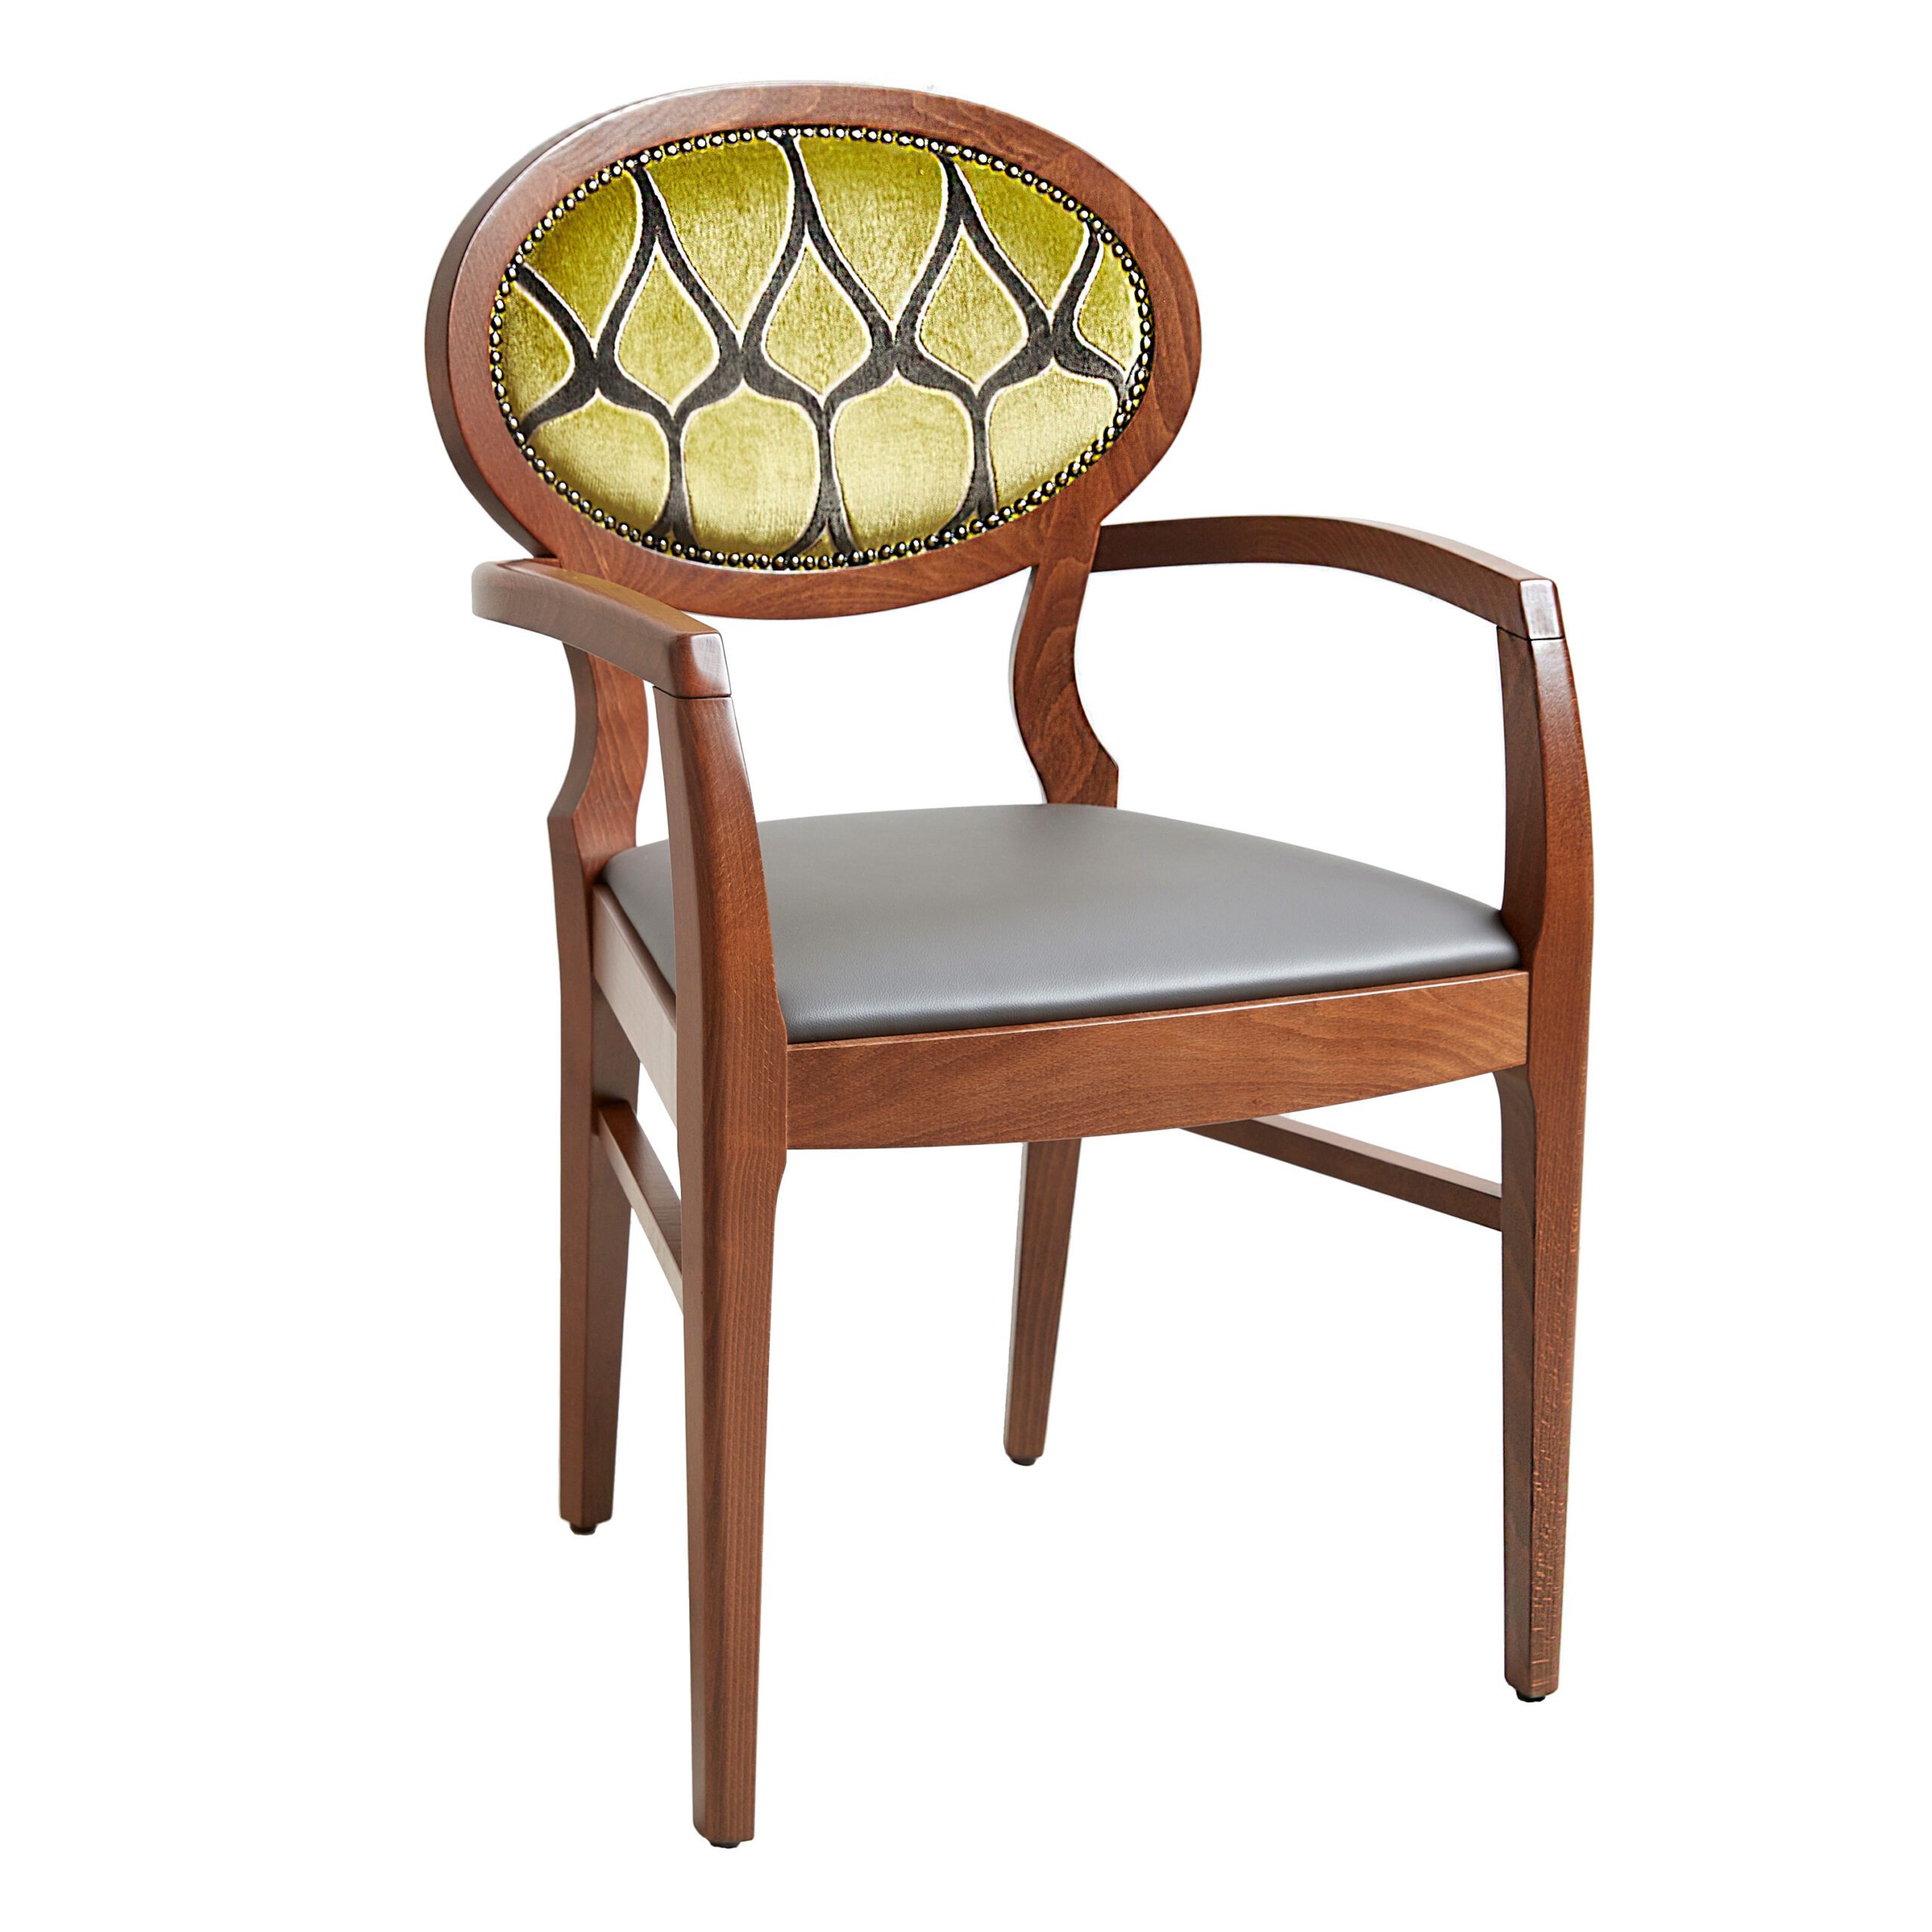 Valday Chair With Arms